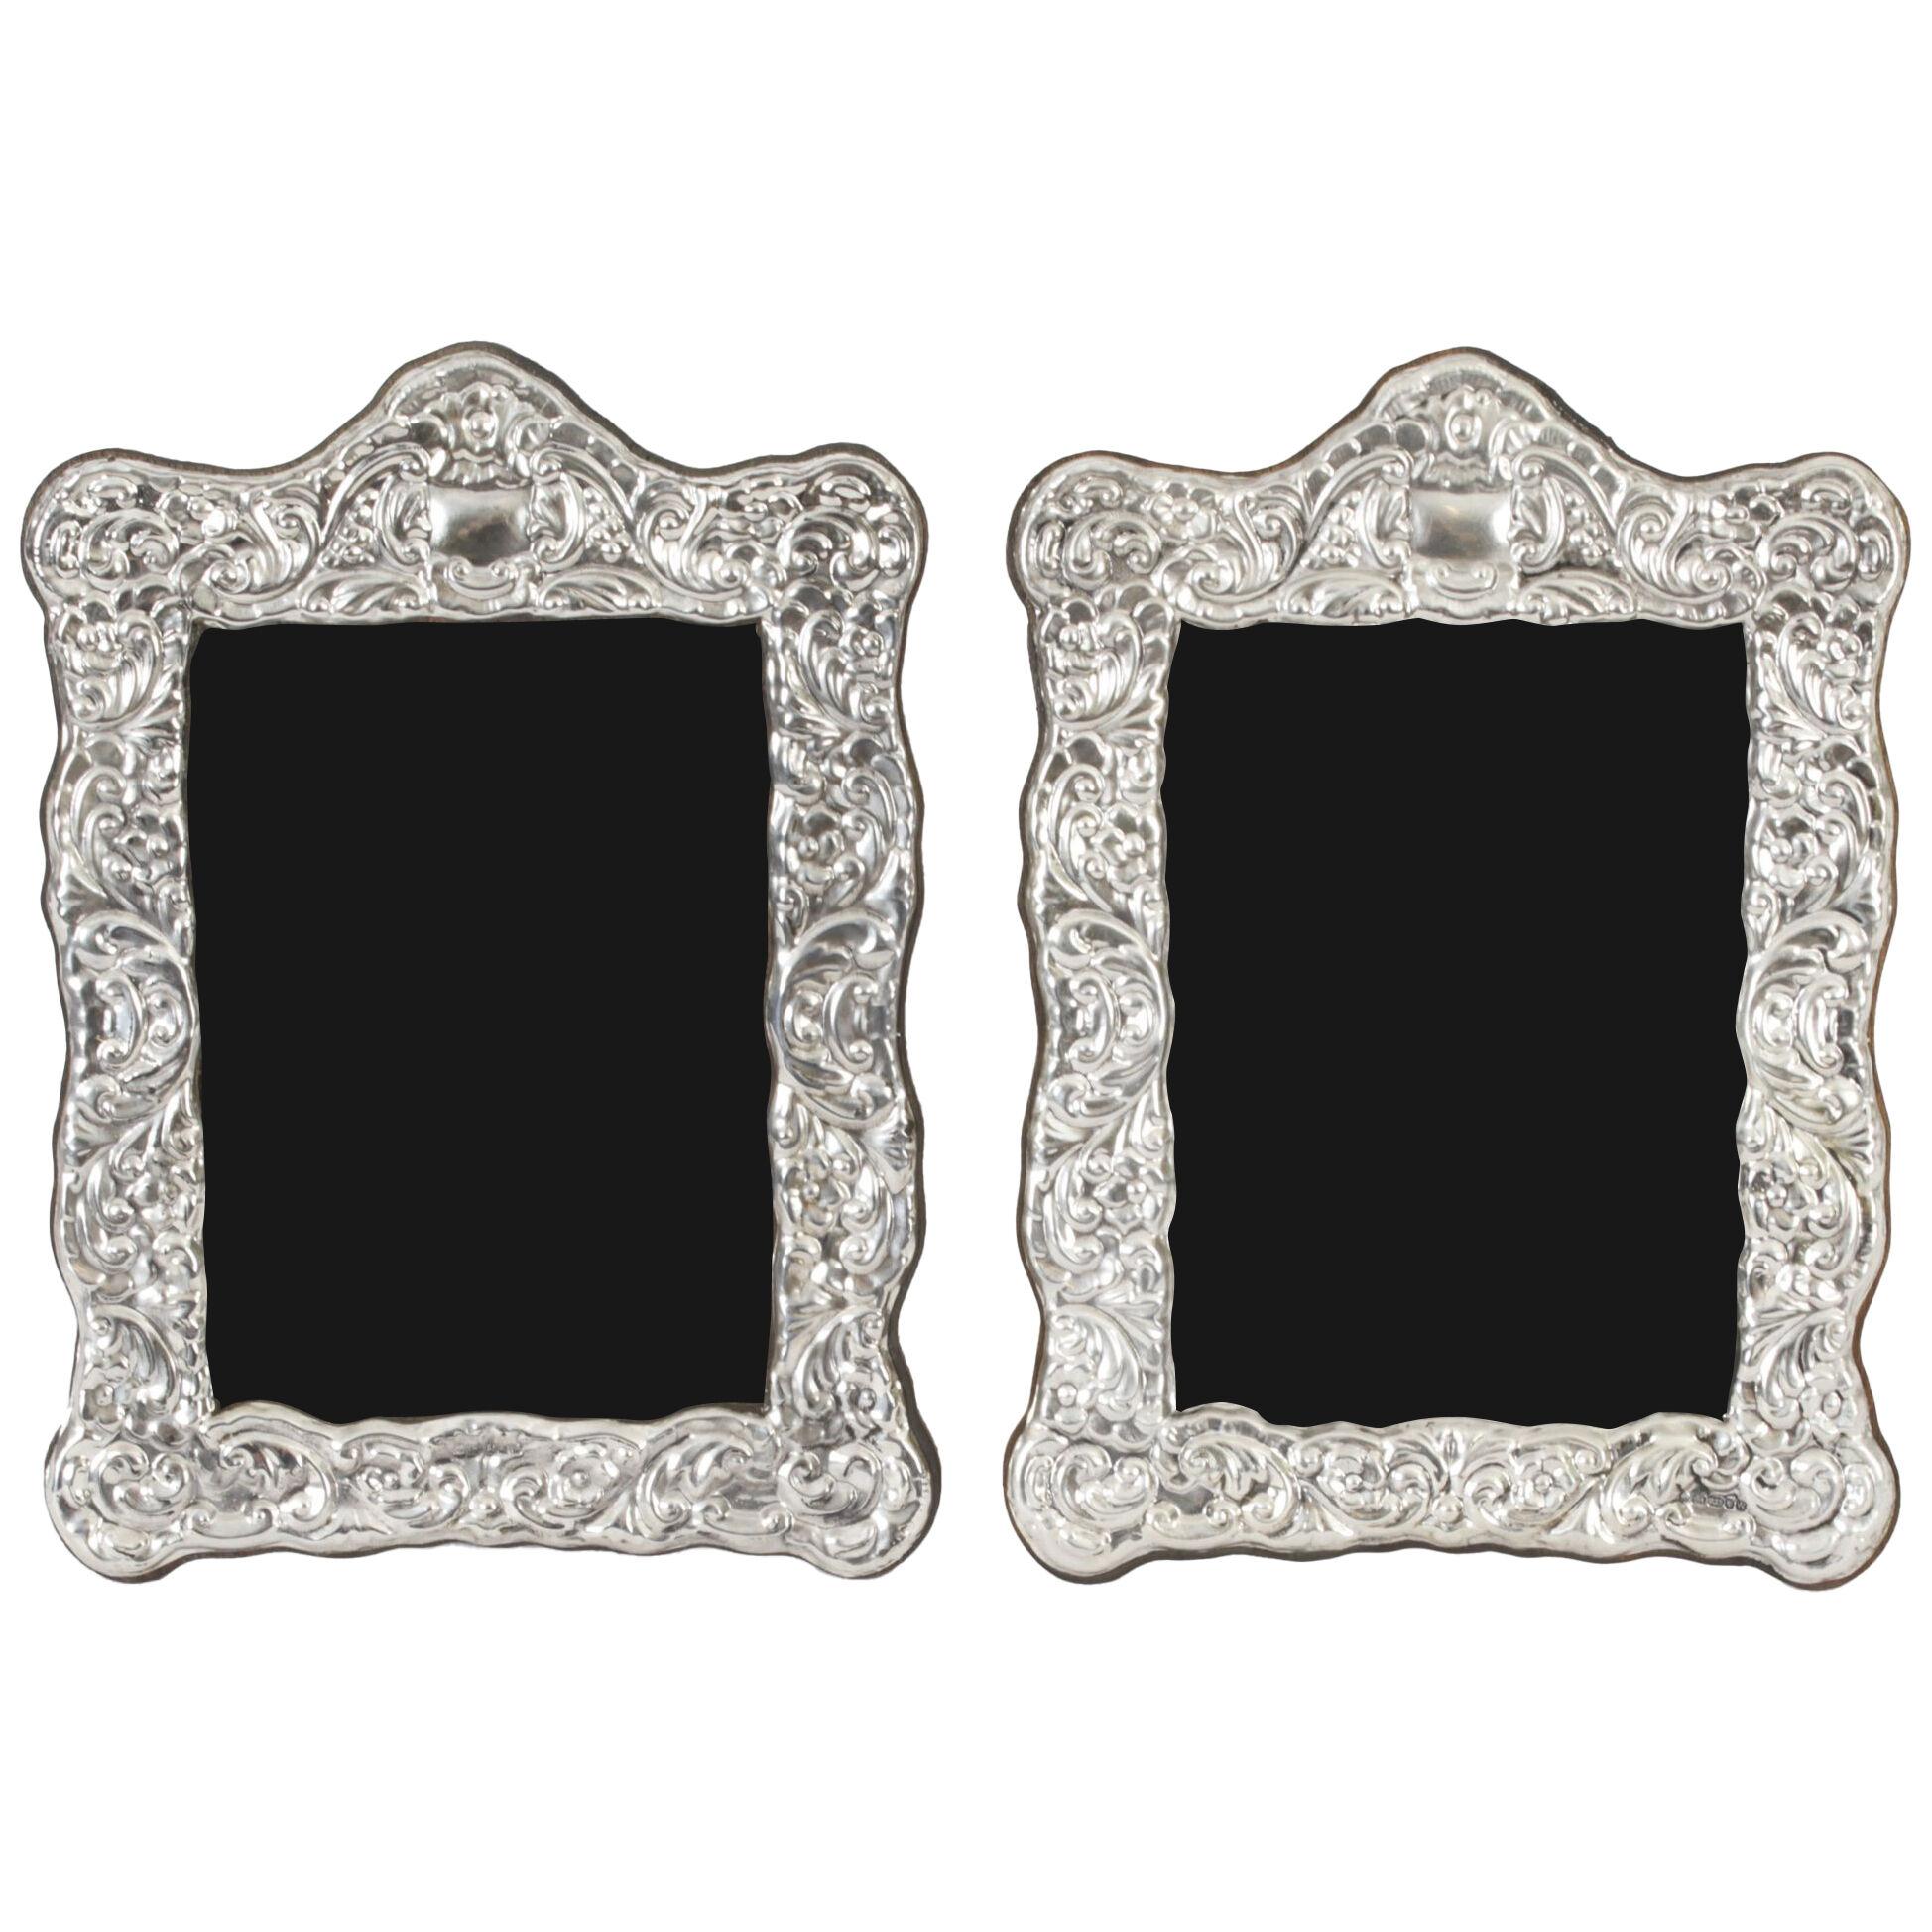 Vintage Pair of Sterling Silver Photo Frames by Harry Frane London 2010